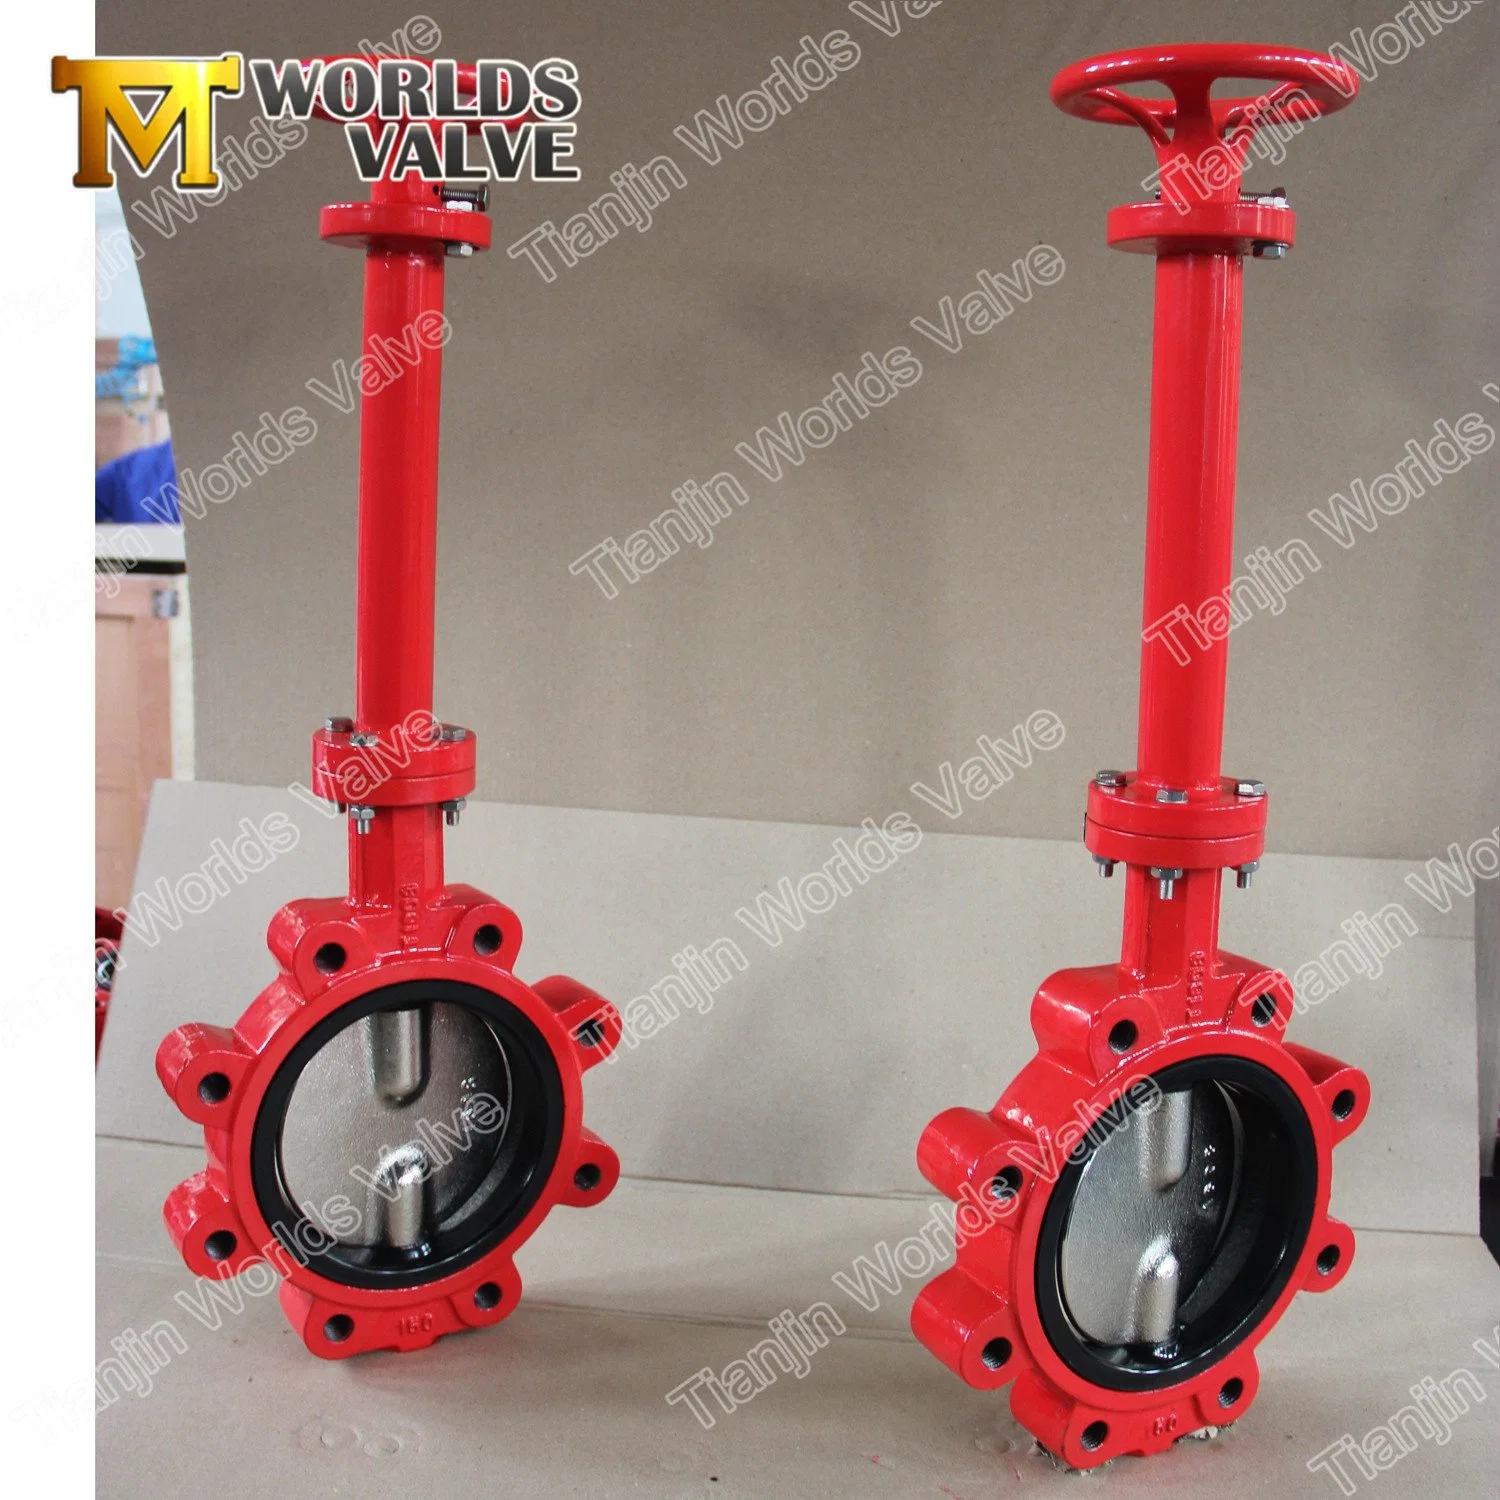 Extended Shaft Lugged and Tapped Butterfly Valve with Wras Approved for Drinking Portable Water